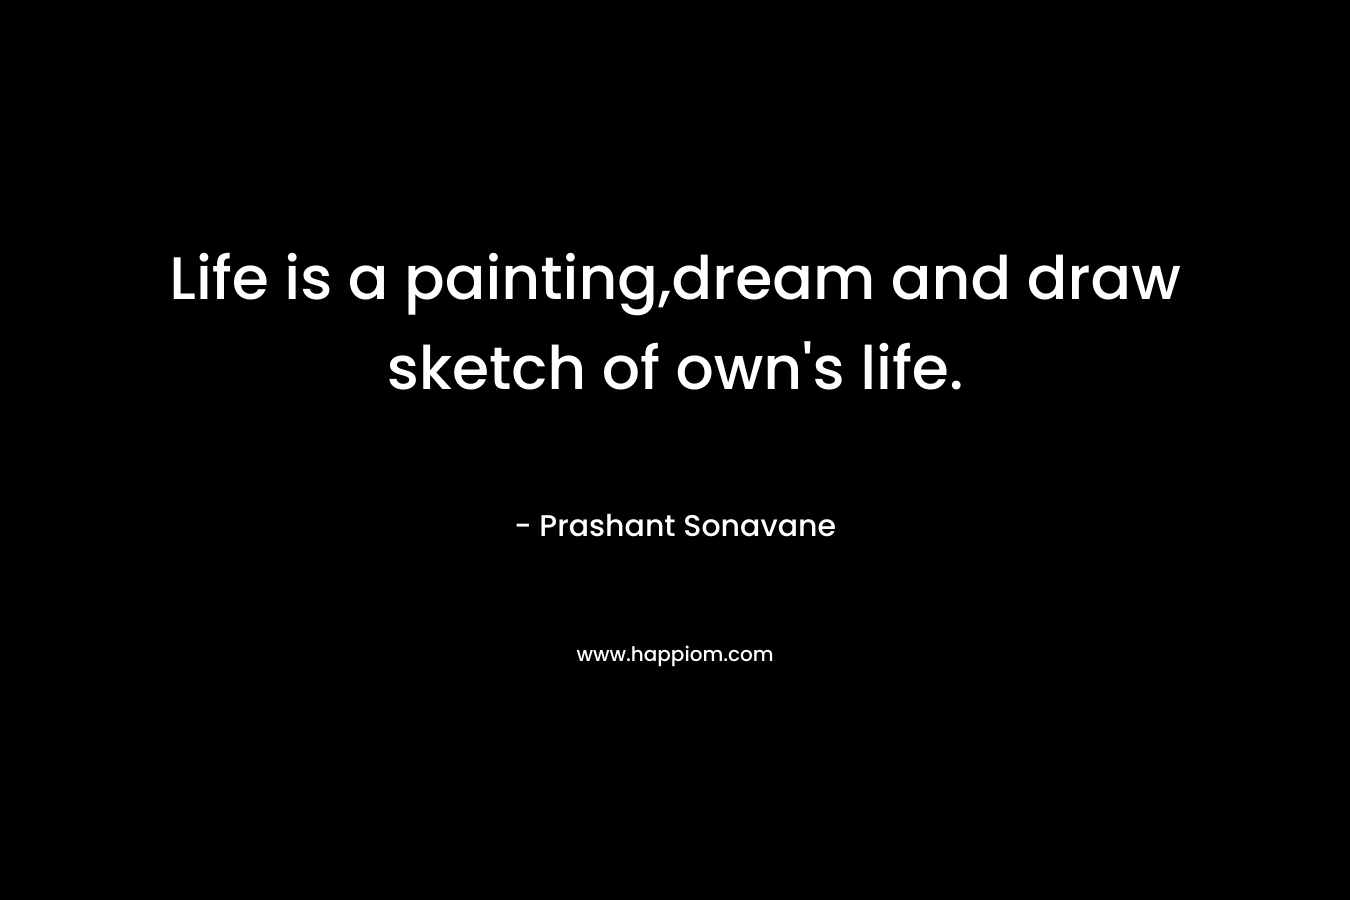 Life is a painting,dream and draw sketch of own's life.